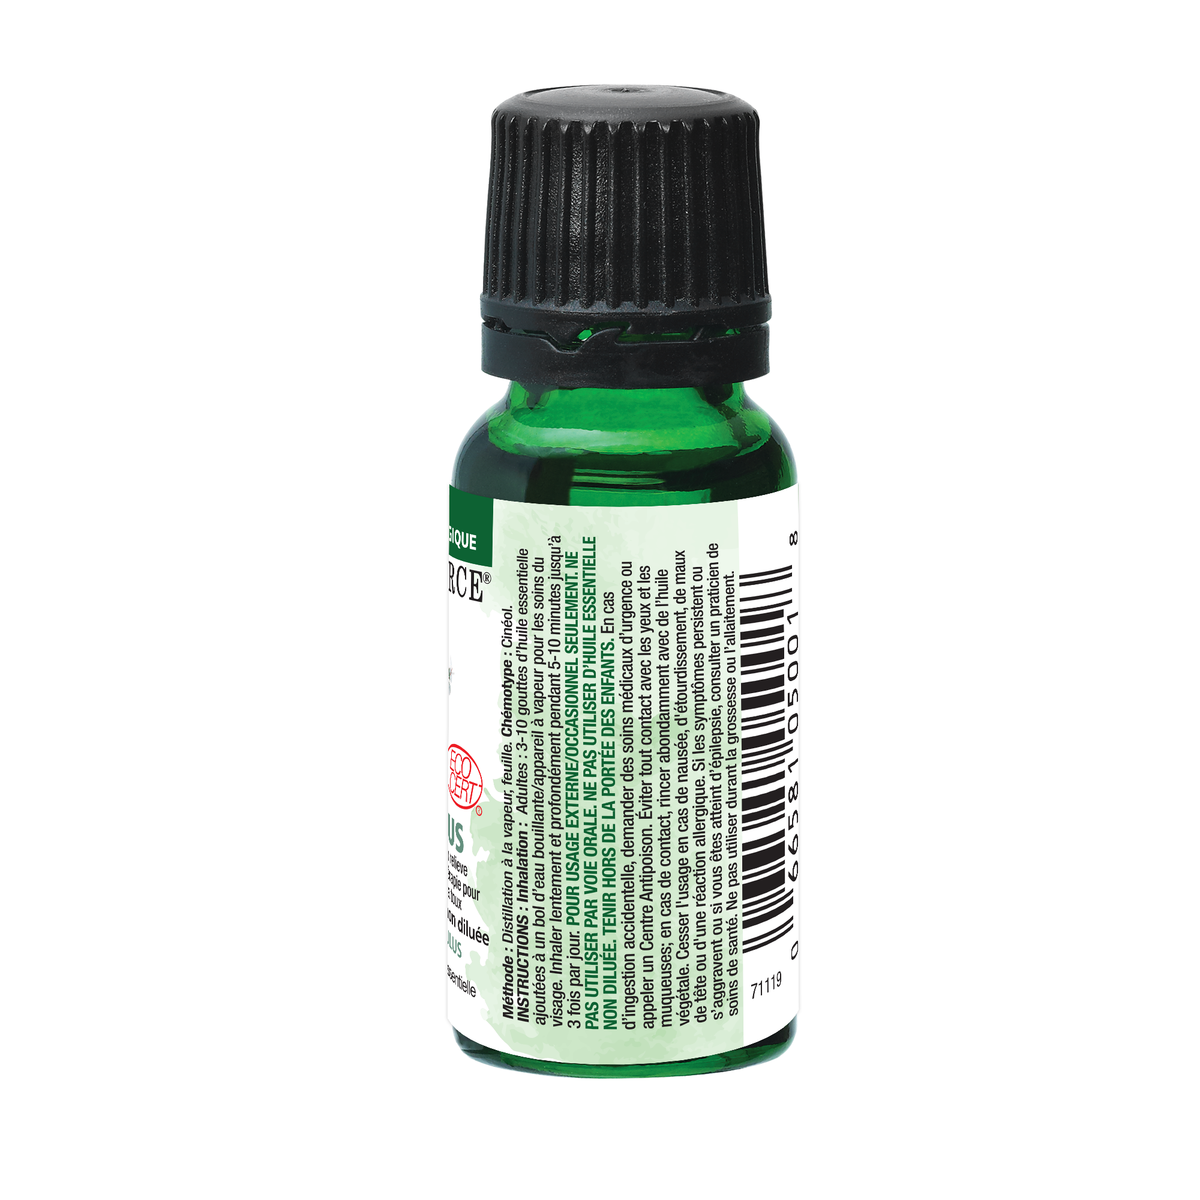 Organic Eucalyptus Essential Oil 100% pure and natural 15mL - Aromaforce